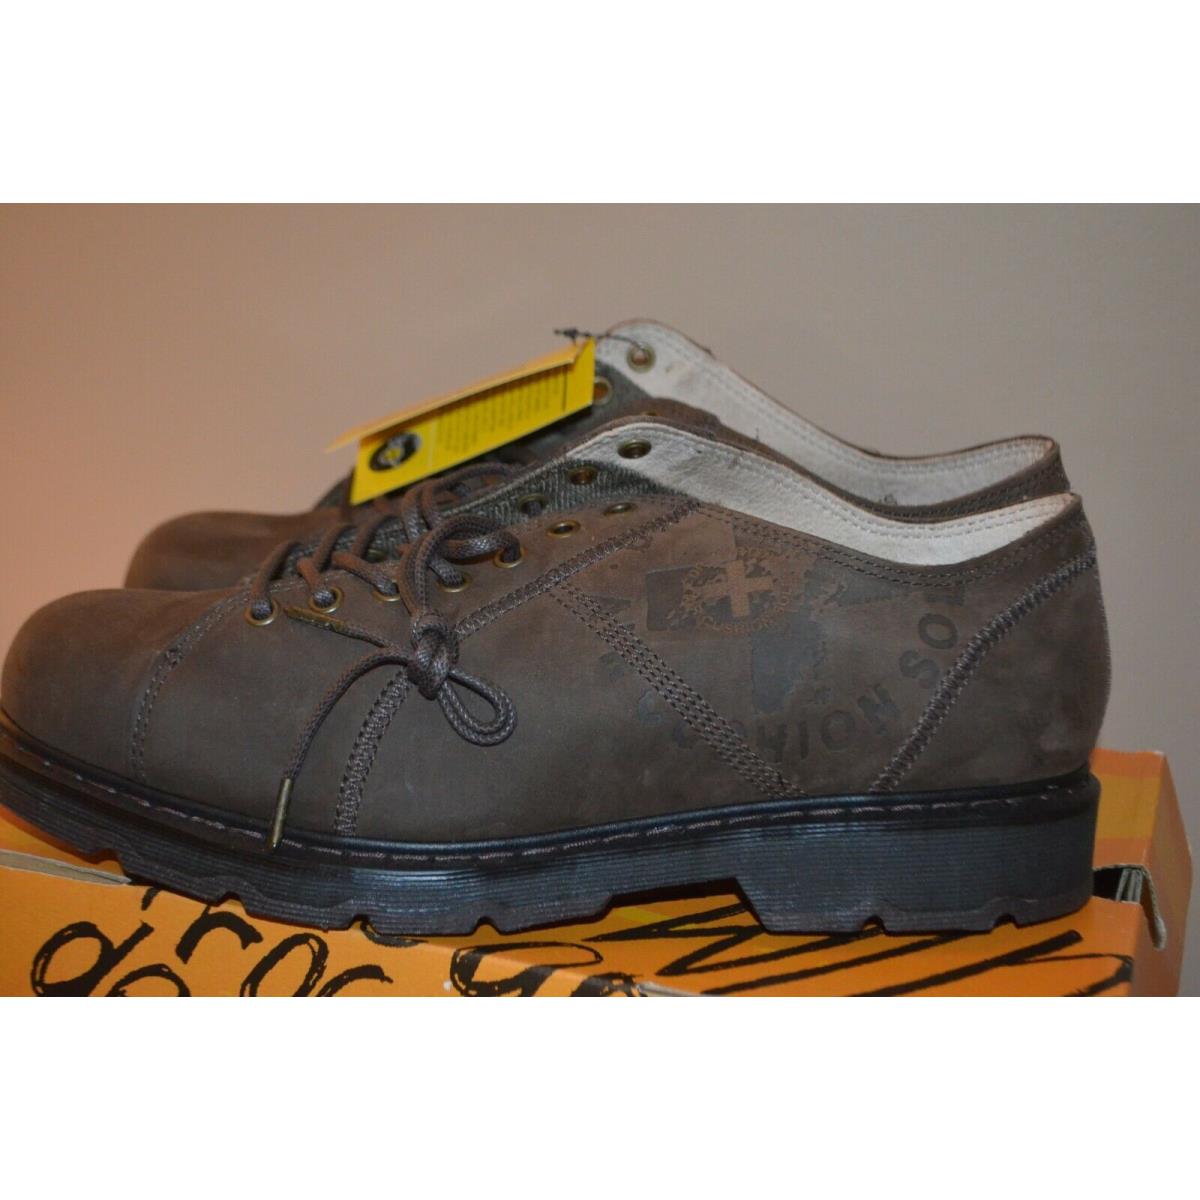 Dr. Martens Oxford Brown Leather Shoes Air Cushion Sole Men`s US Size 13